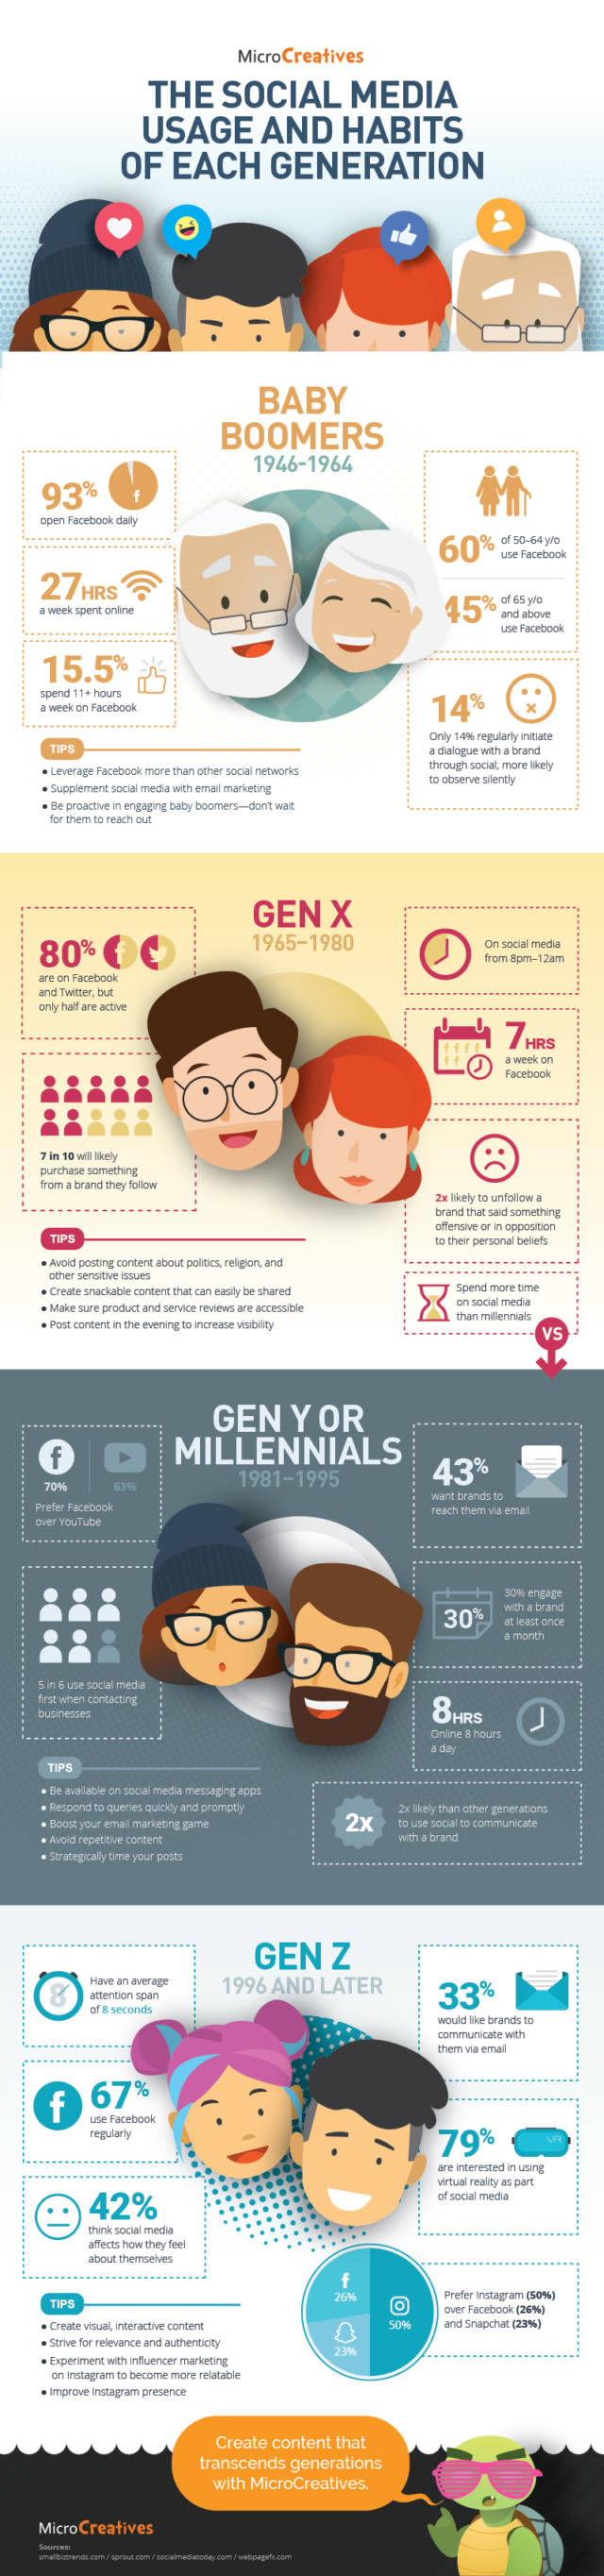 MiC_Oct-Infographic_The-Social-Media-Usage-and-Habits-of-Each-Generation_v2-640×2729